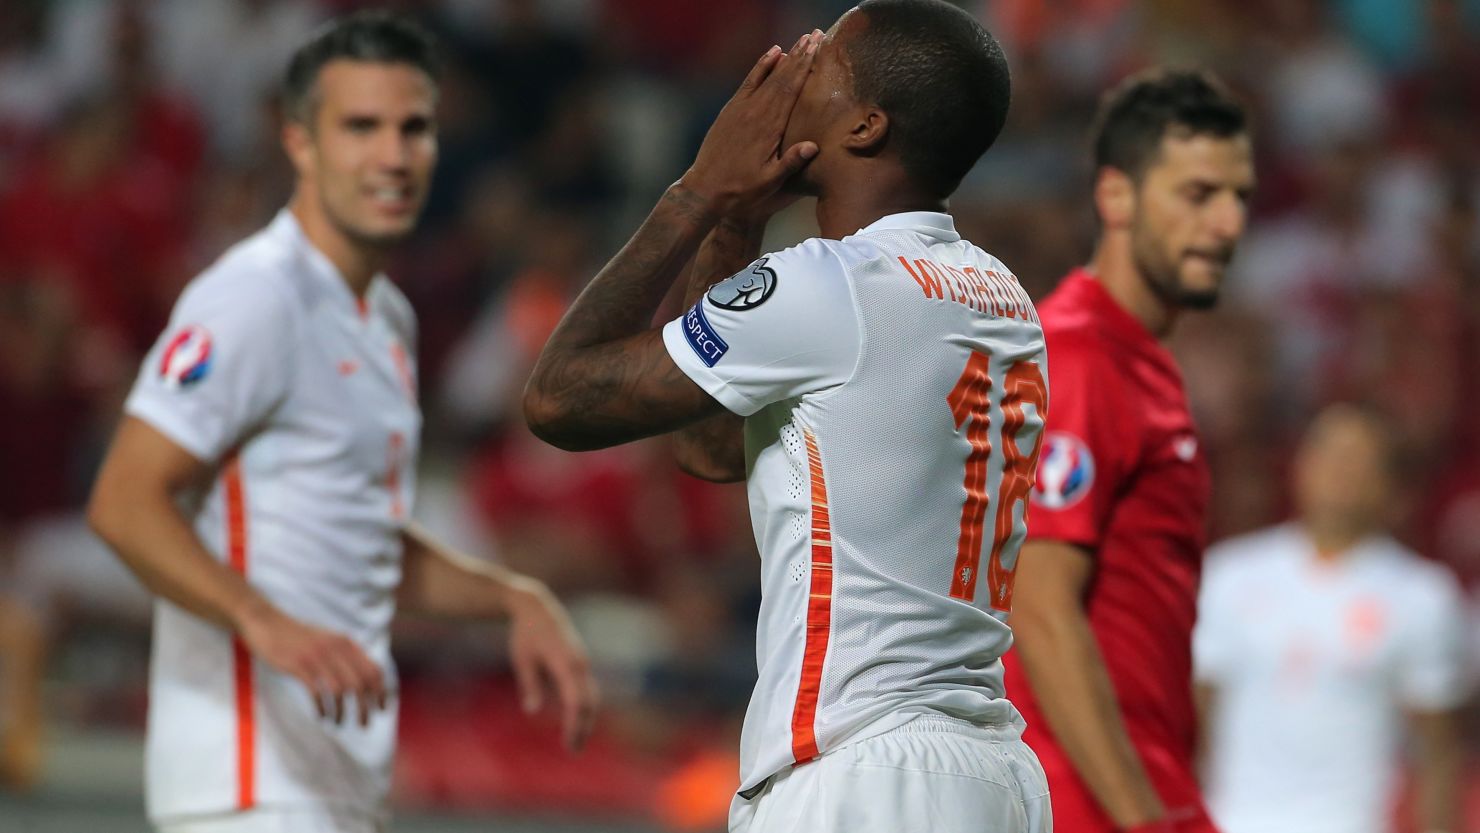 Netherland's Georgino Wijnaldum (C) gestures at the end of the Euro 2016 qualifying match between Turkey and Netherlands at the Arena Stadium in Konya on September 6, 2015. Turkey defeated the Netherlands 3-0.